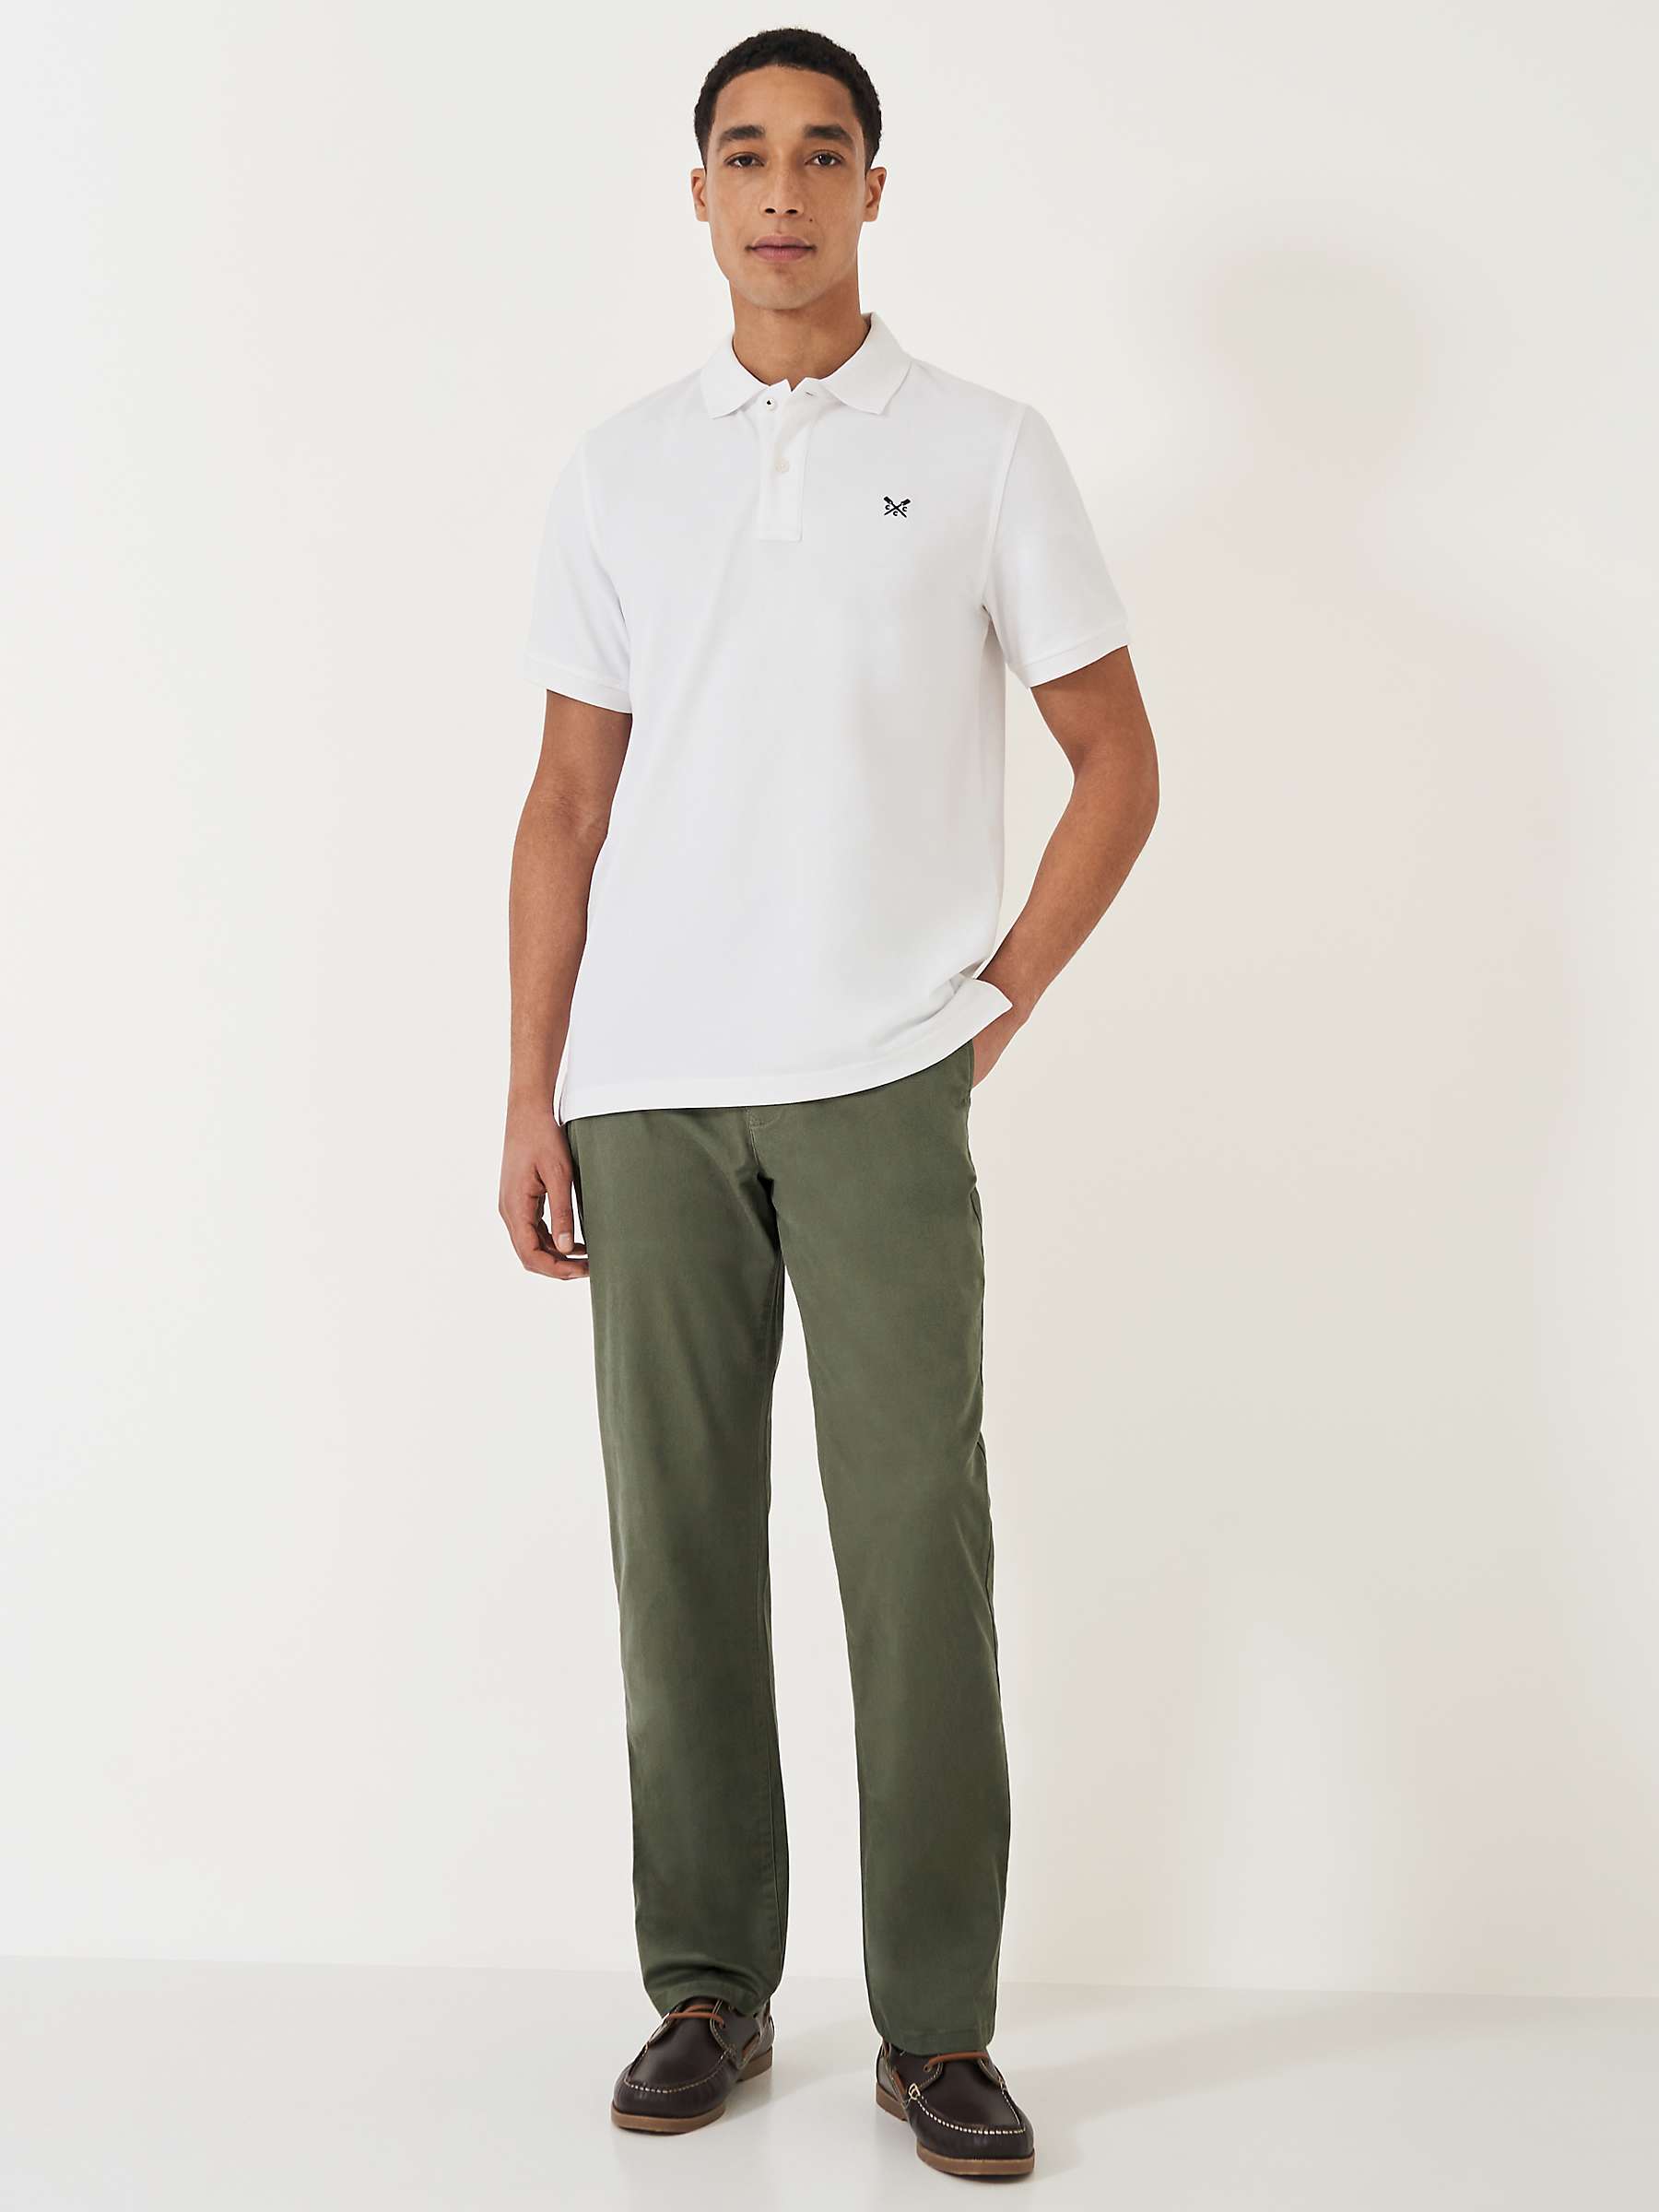 Buy Crew Clothing Straight Fit Chinos Online at johnlewis.com